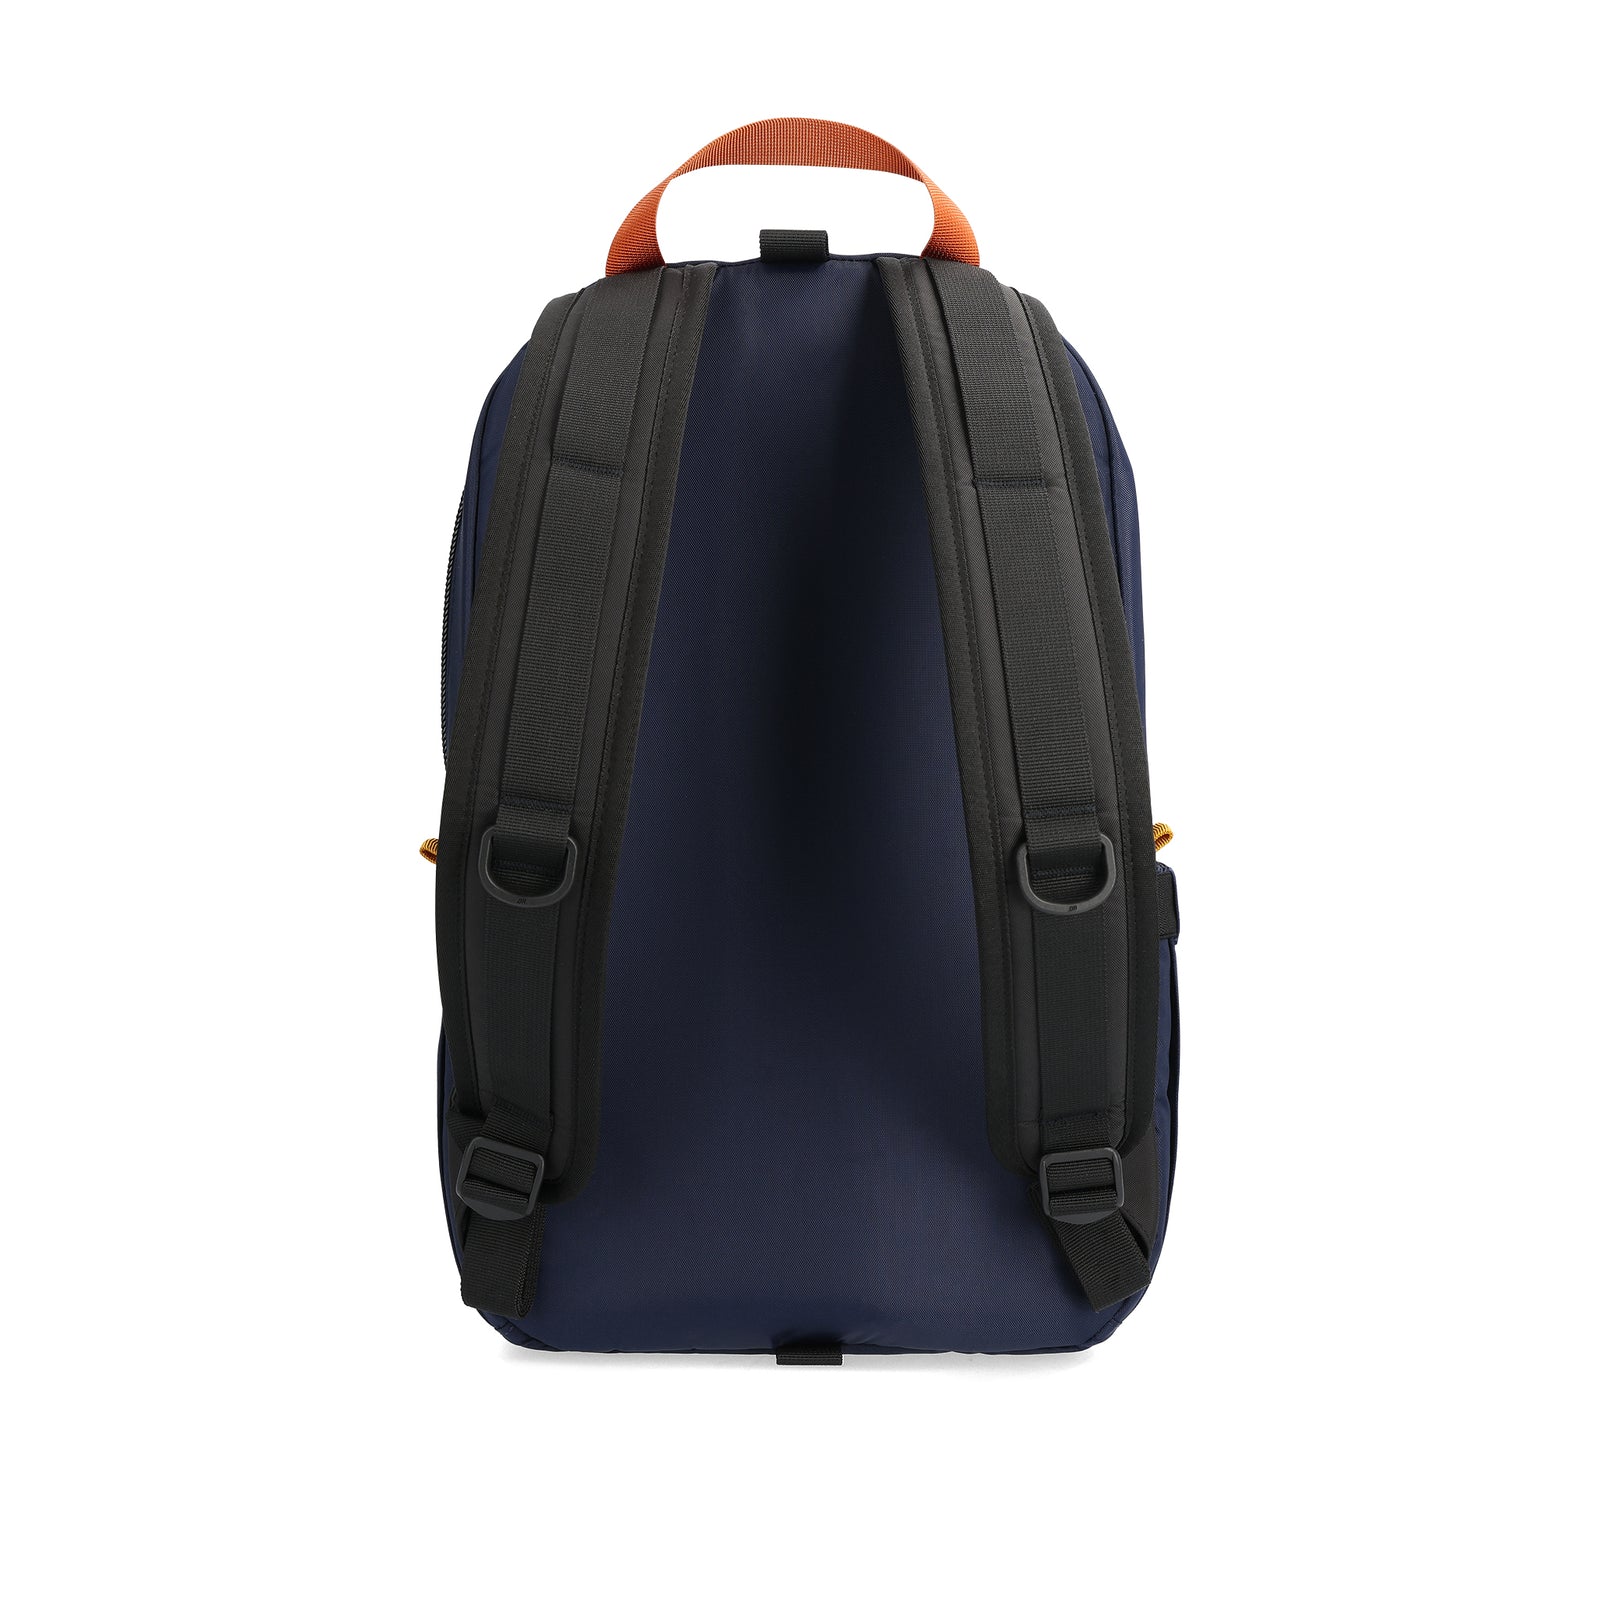 Back View of Topo Designs Light Pack in "Navy / Multi"